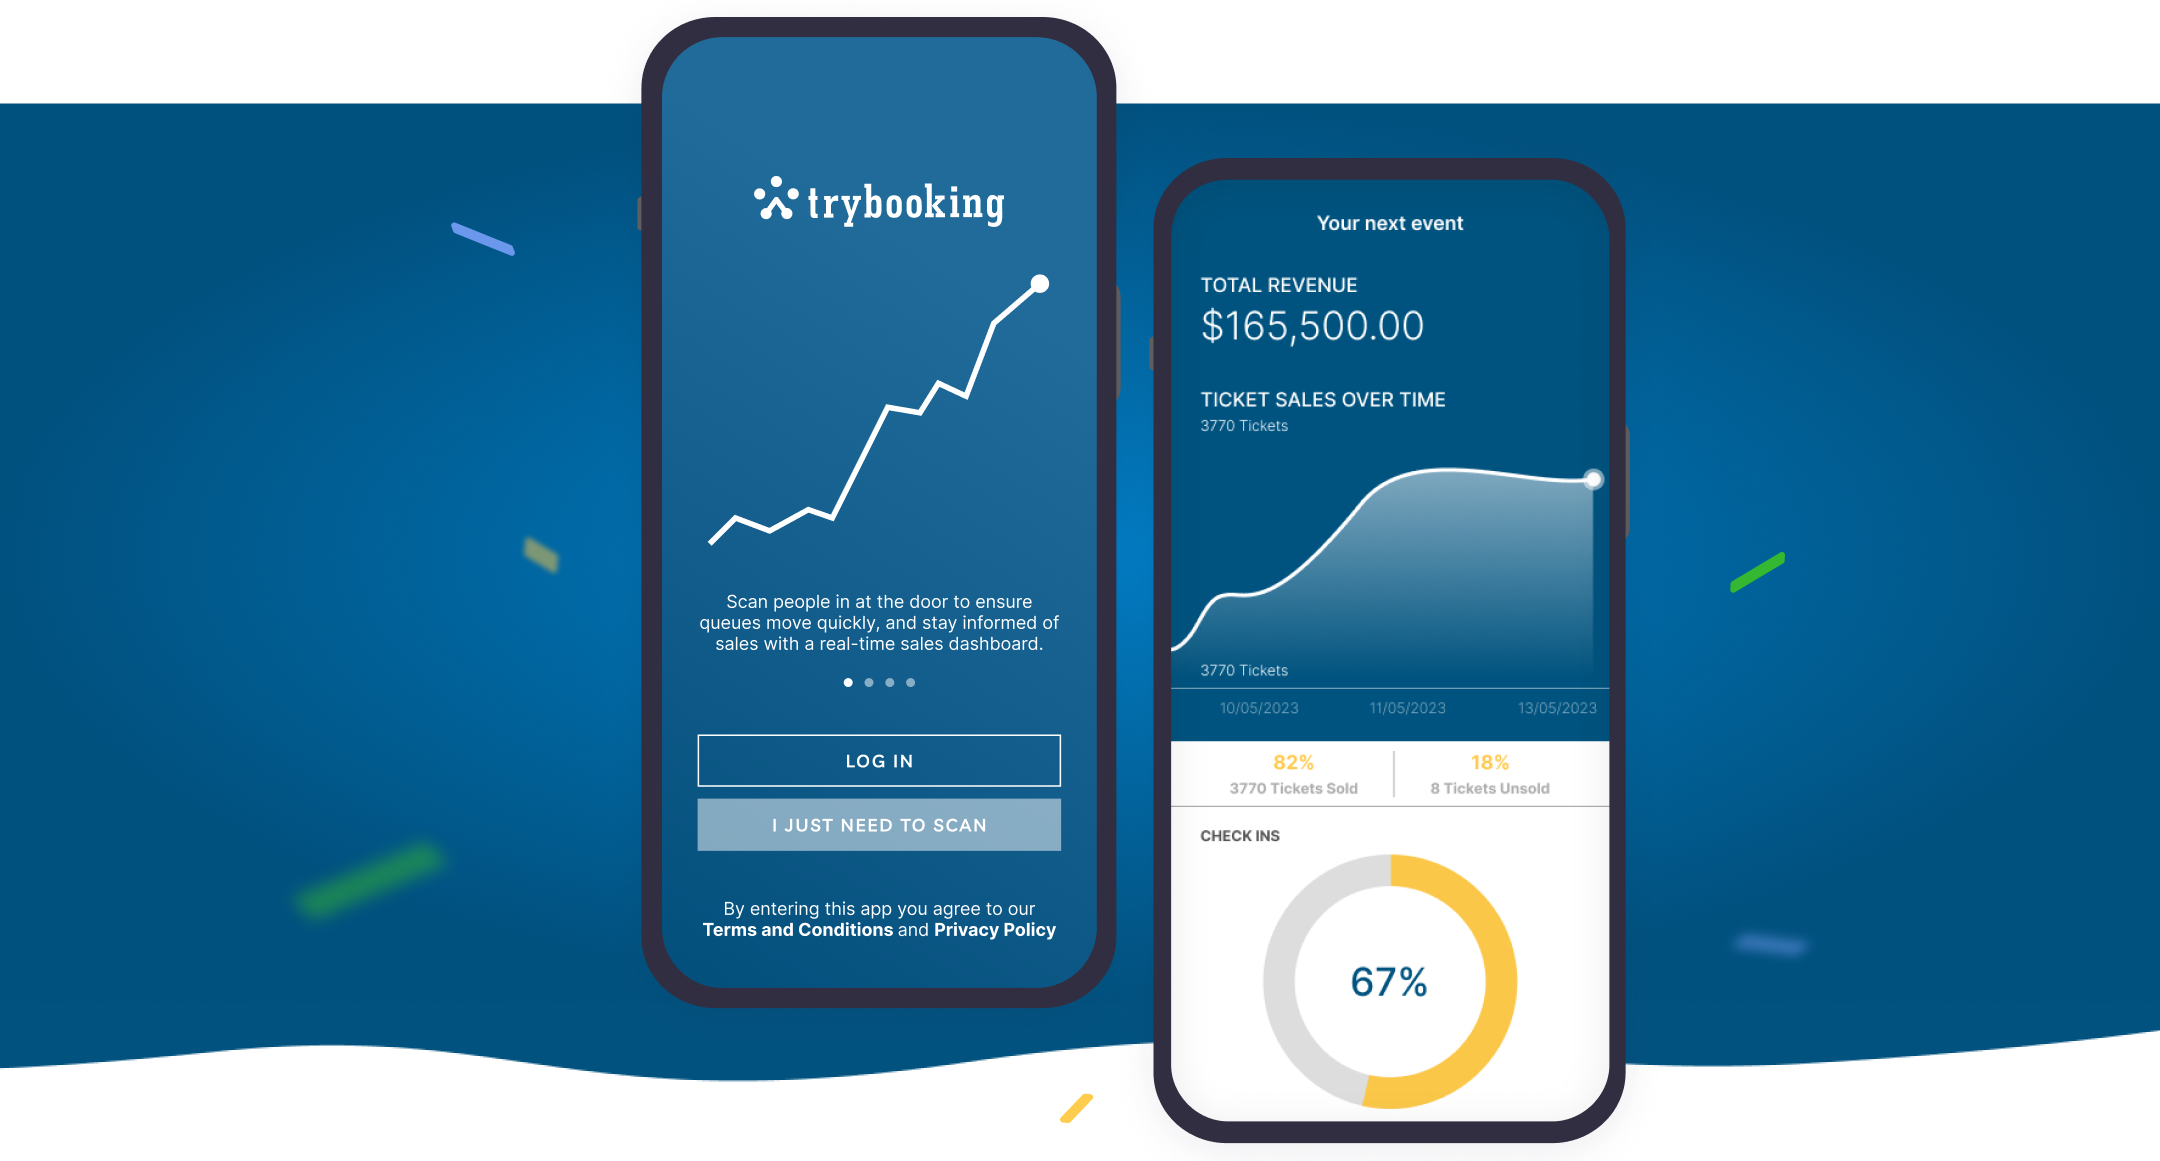 Two mobile screens of the Trybooking mobile app, one on the login screen and the other showing ticket sales and total revenue.